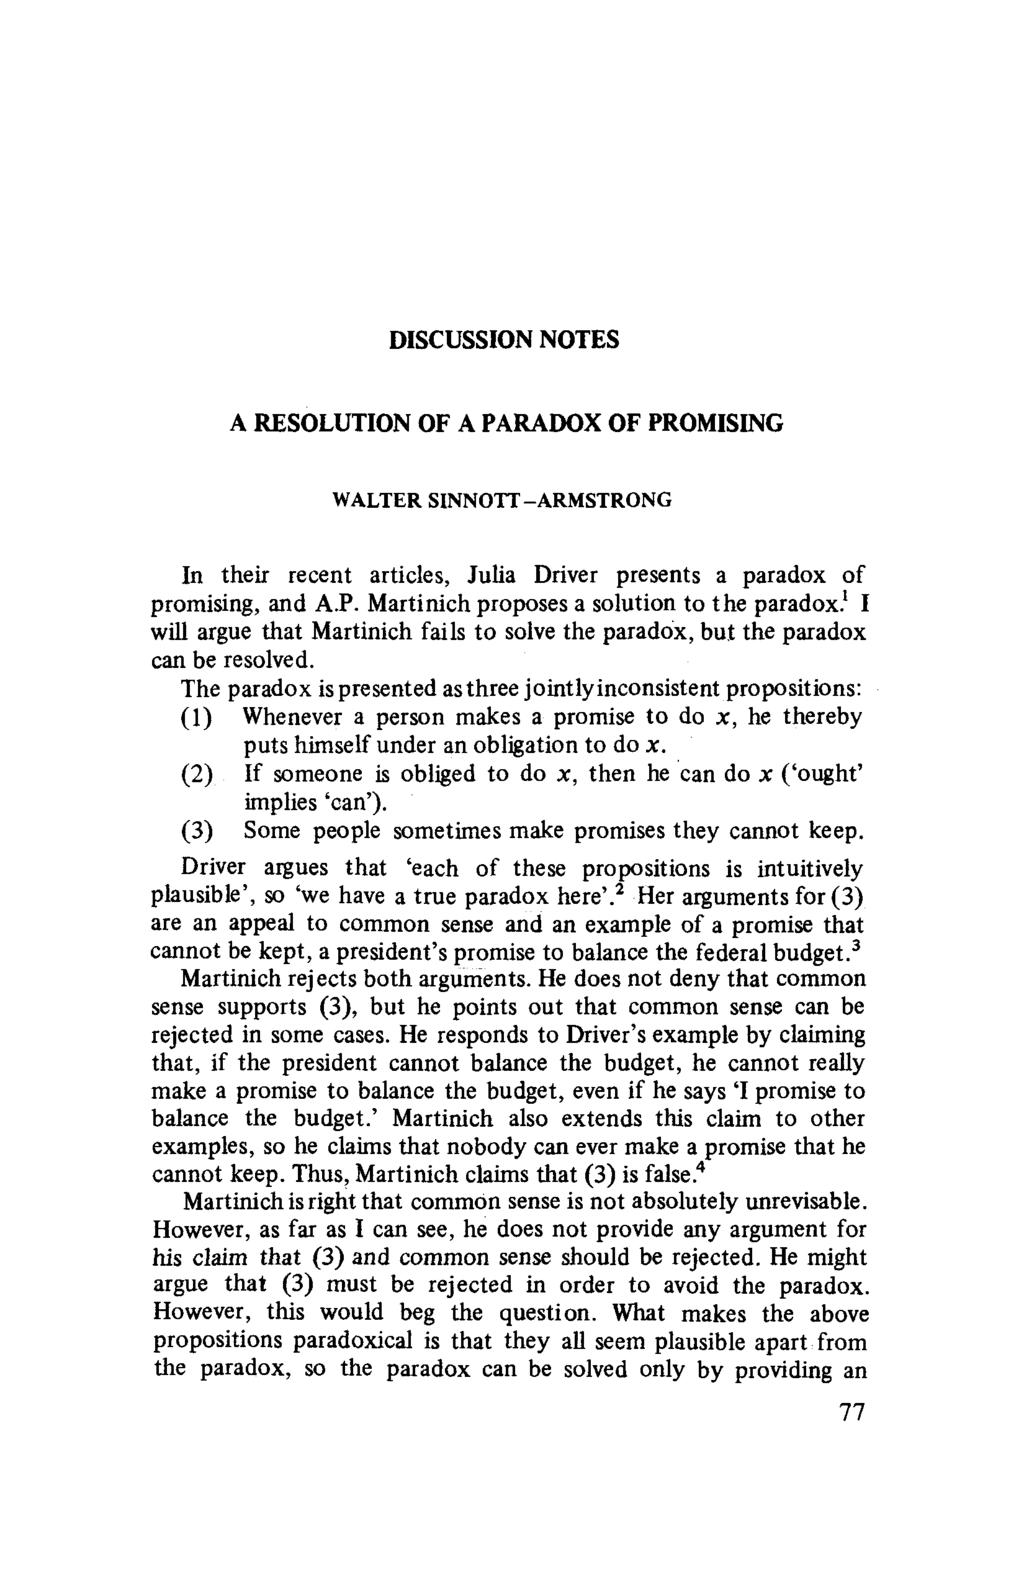 DISCUSSION NOTES A RESOLUTION OF A PARADOX OF PROMISING WALTER SINNOTT-ARMSTRONG In their recent articles, Julia Driver presents a paradox of promising, and A.P. Martinich proposes a solution to the paradox) I will argue that Martinich fails to solve the paradox, but the paradox can be resolved.